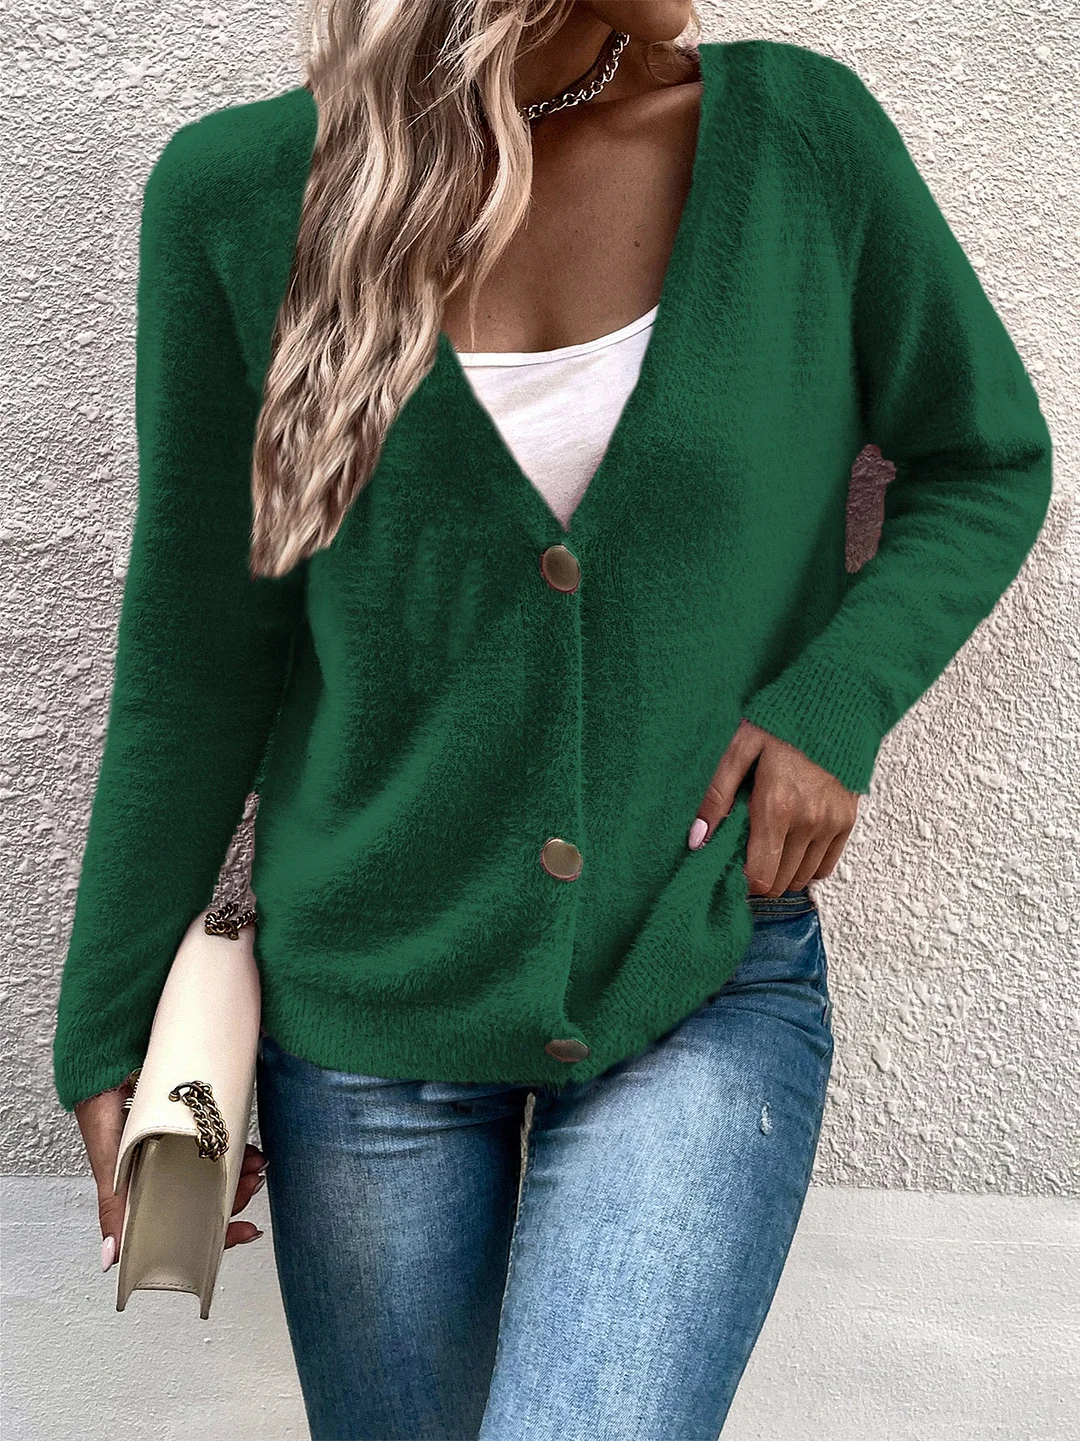 Women plus size clothing Women's Solid Color Buttons V-neck Long Sleeve Sweater Coat-Nordswear